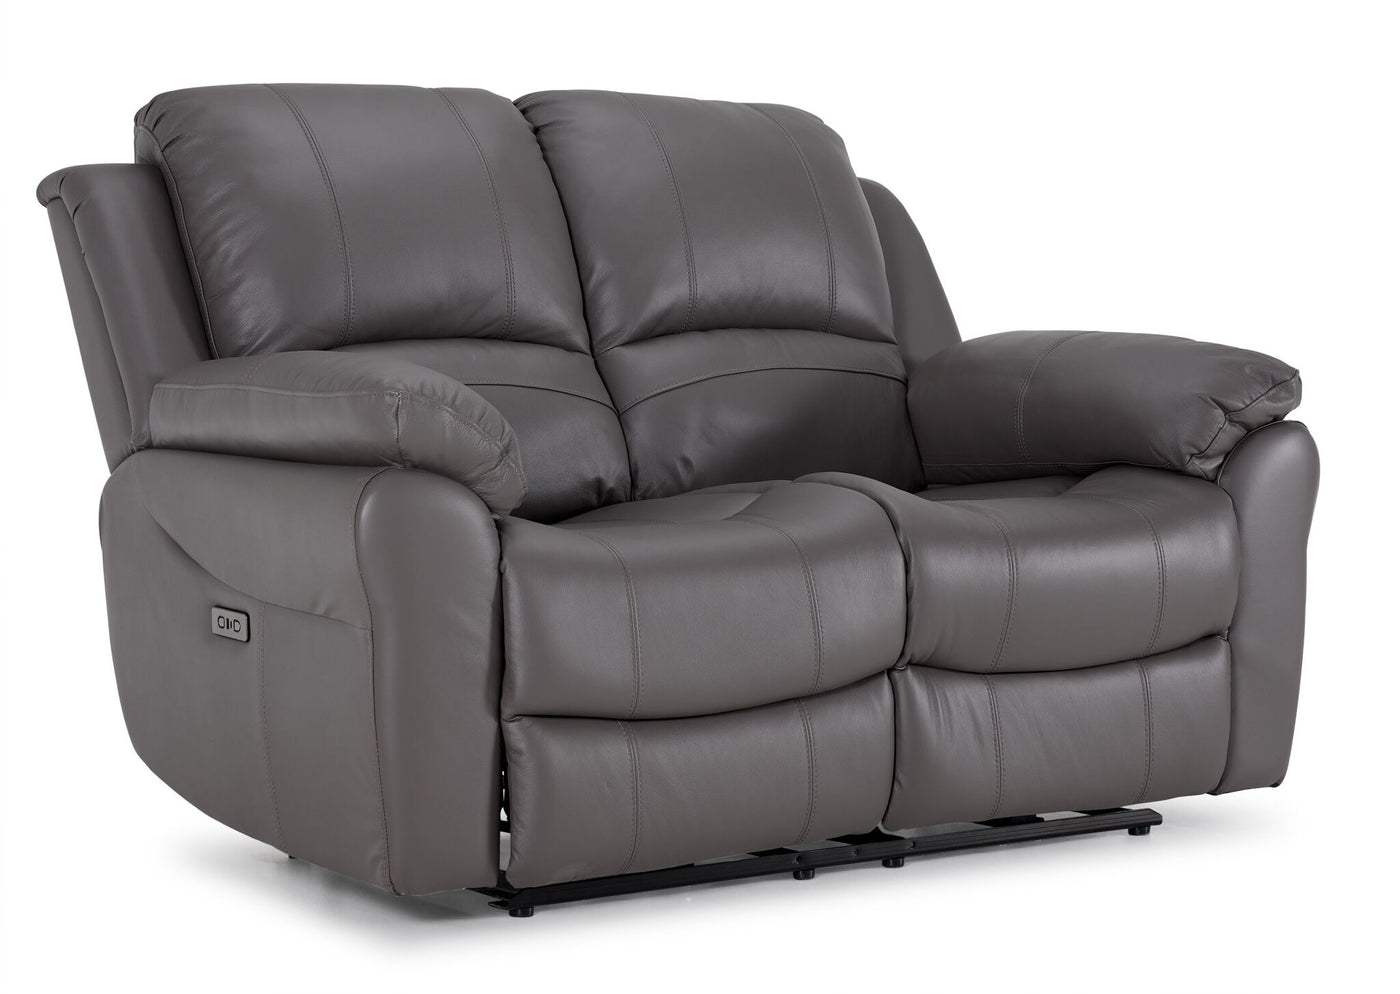 Alba Leather Power Reclining Sofa, Loveseat and Chair Set - Grey